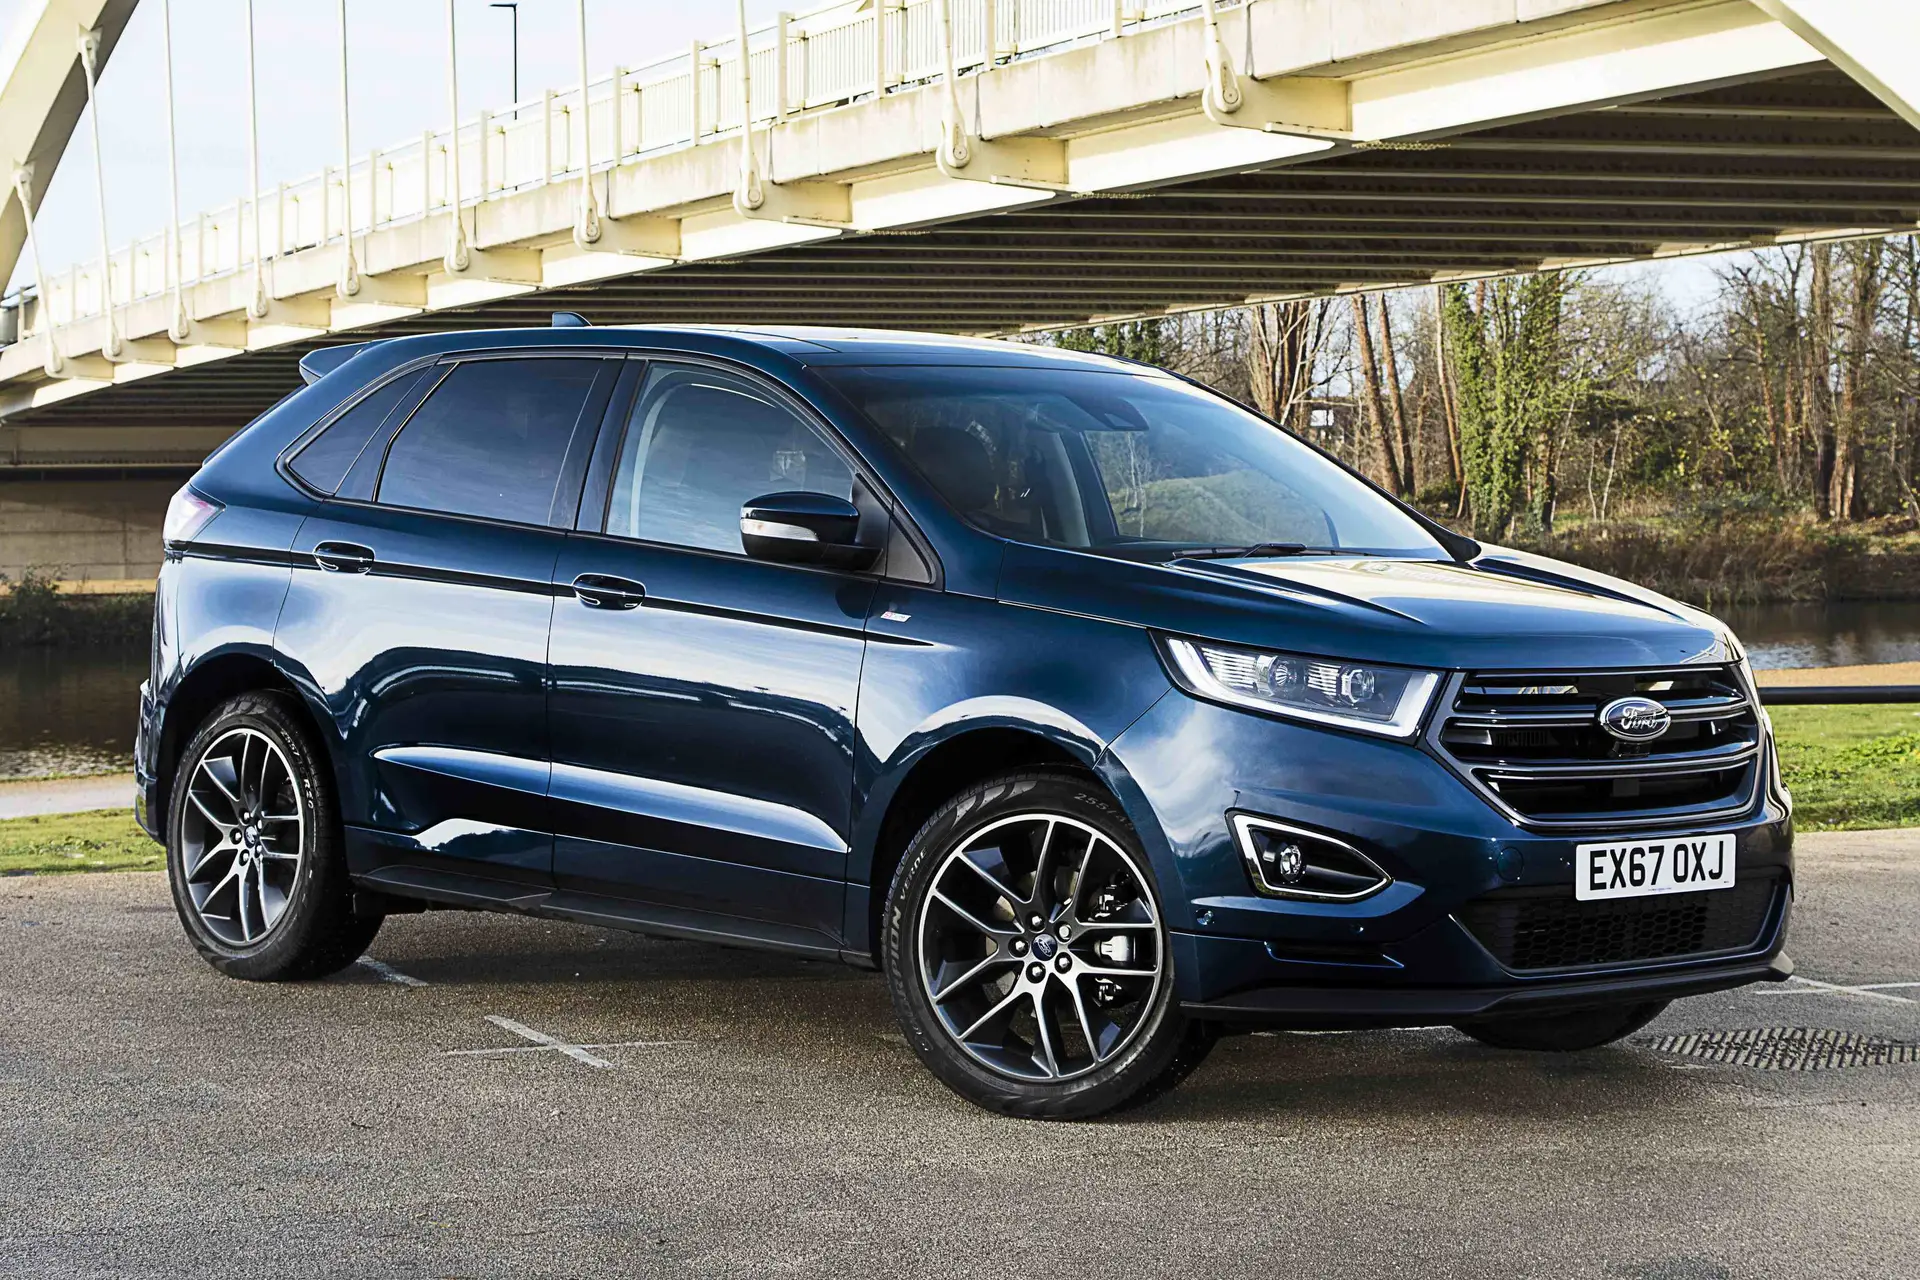 Ford Edge (2016-2019) Review: exterior front three quarter photo of the Ford Edge